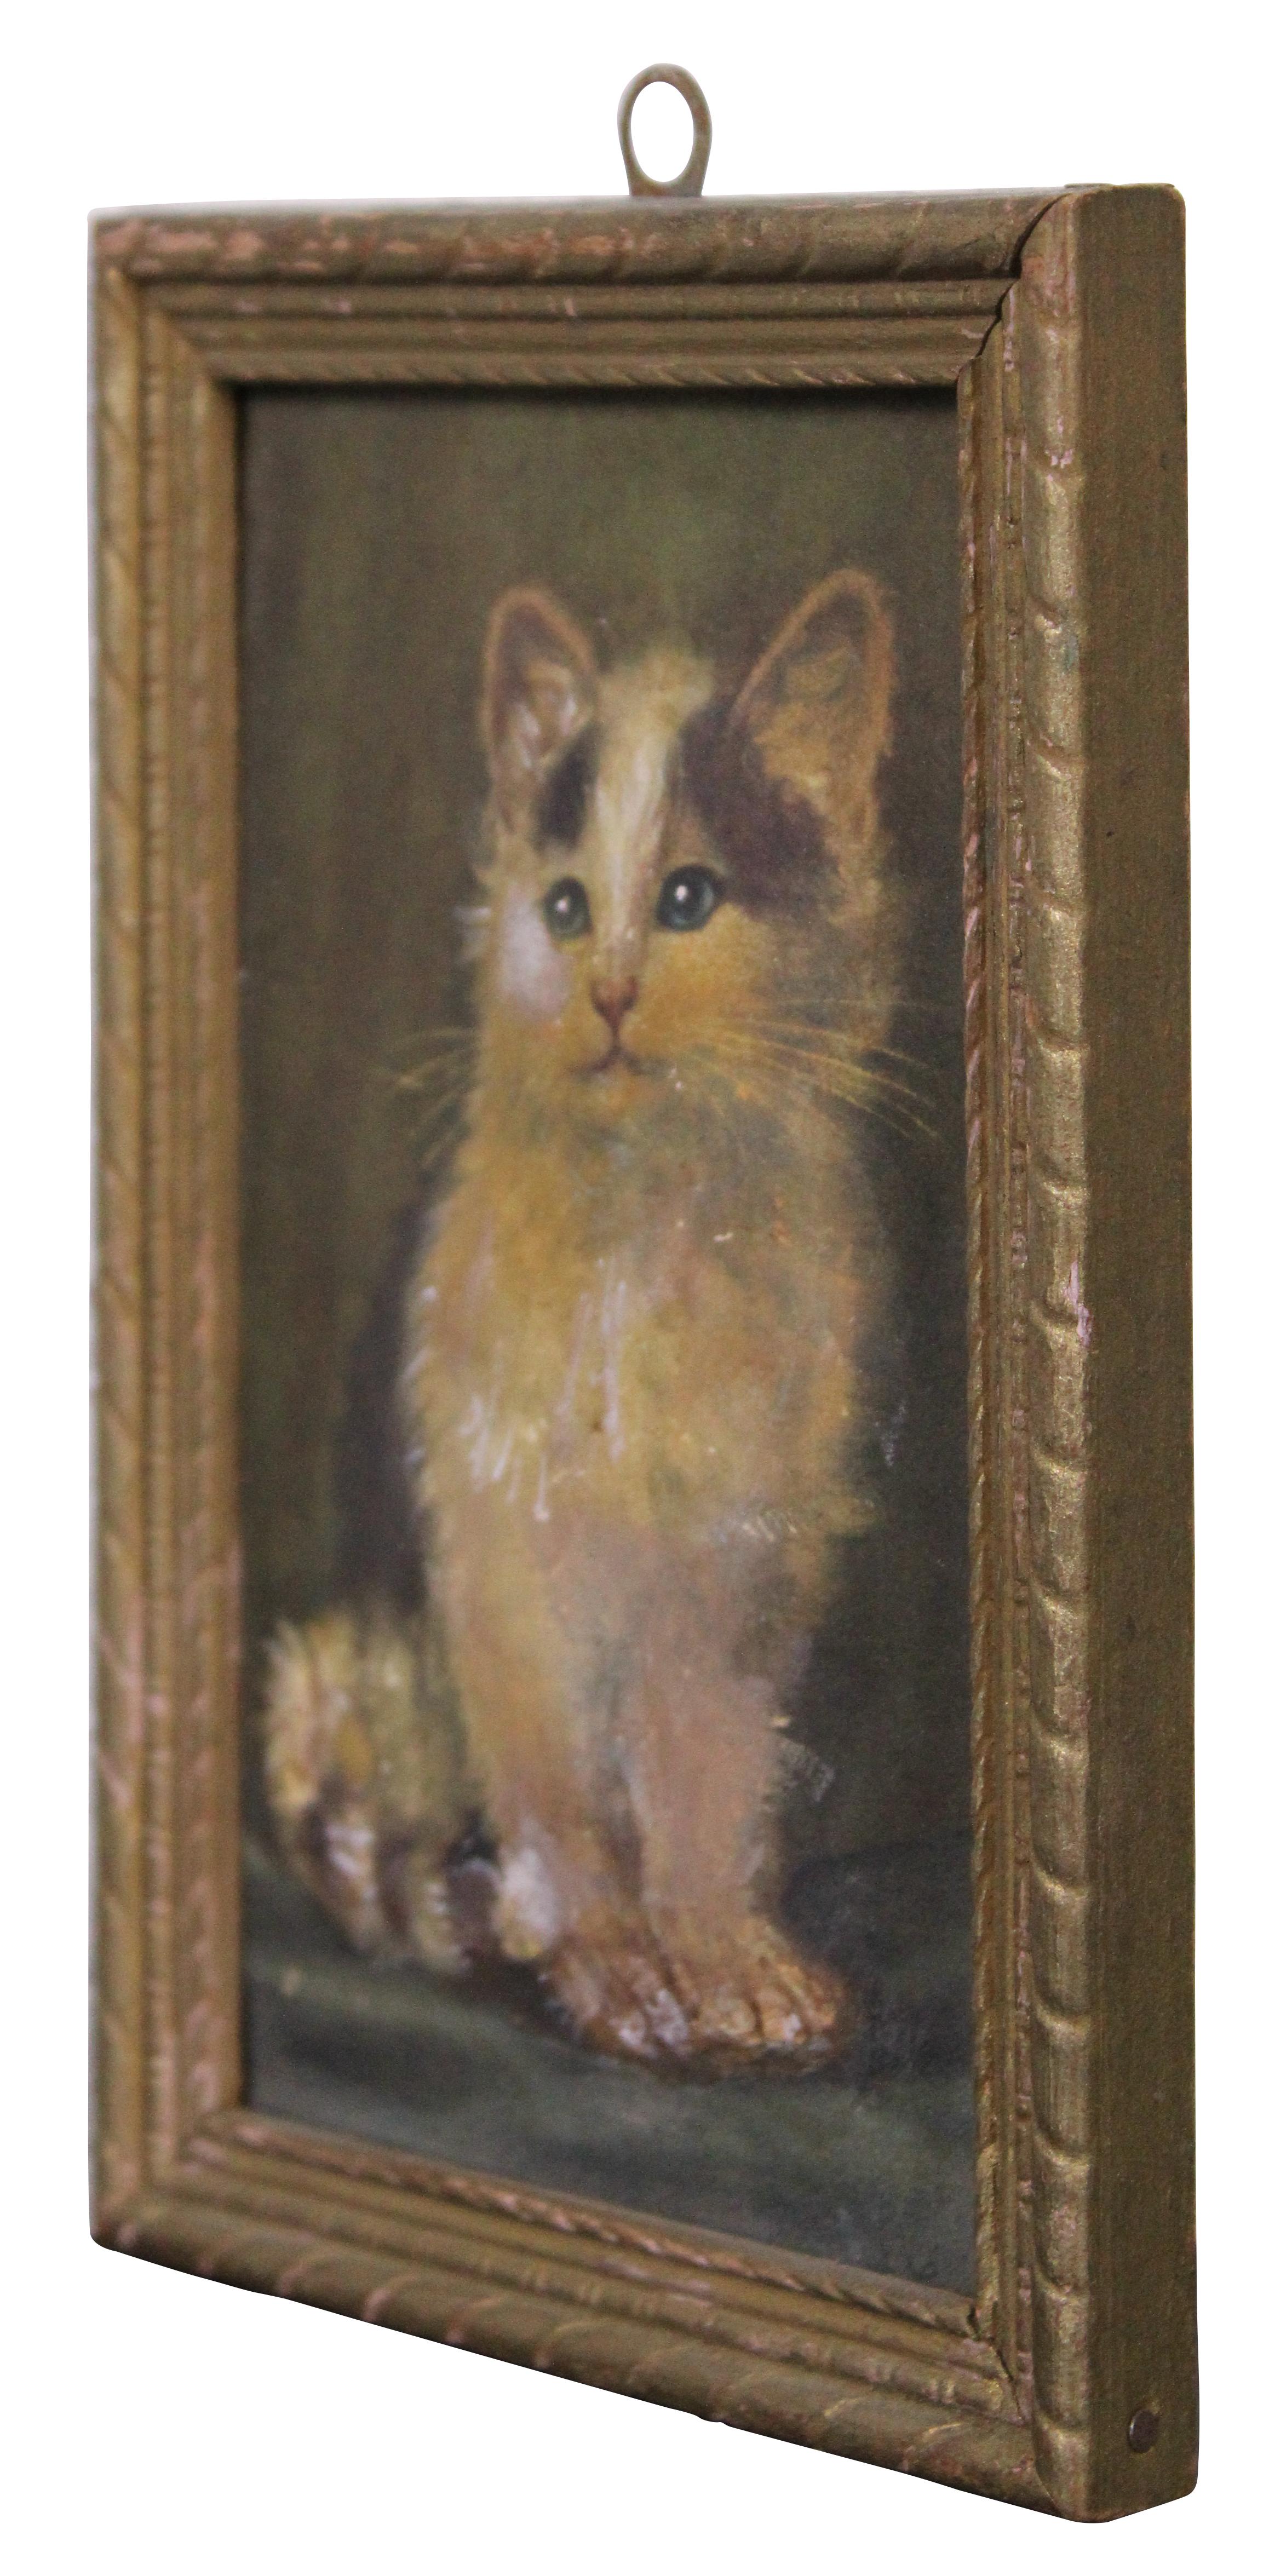 Small antique 19th century watercolor painting of a fluffy kitten, molded over a raised surface to be slightly 3-dimensional.

Measures: 4.25” x 0.5” x 6.25” / Sans Frame - 3.125” x 5.25” (Width x Depth x Height).